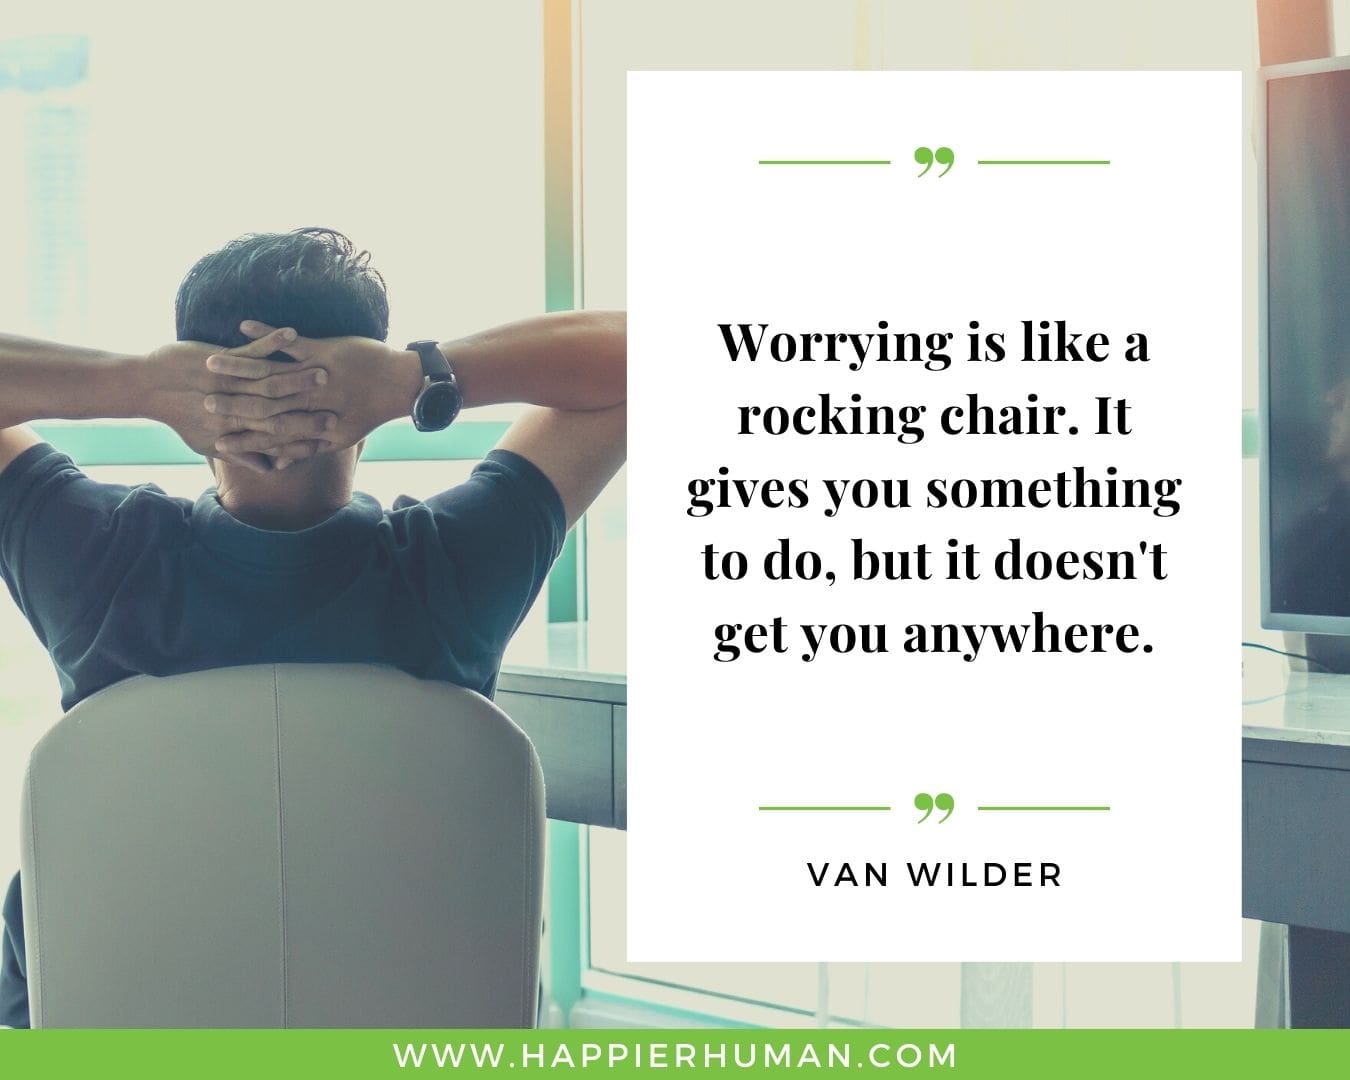 Overthinking Quotes - "Worrying is like a rocking chair. It gives you something to do, but it doesn't get you anywhere." - Van Wilder